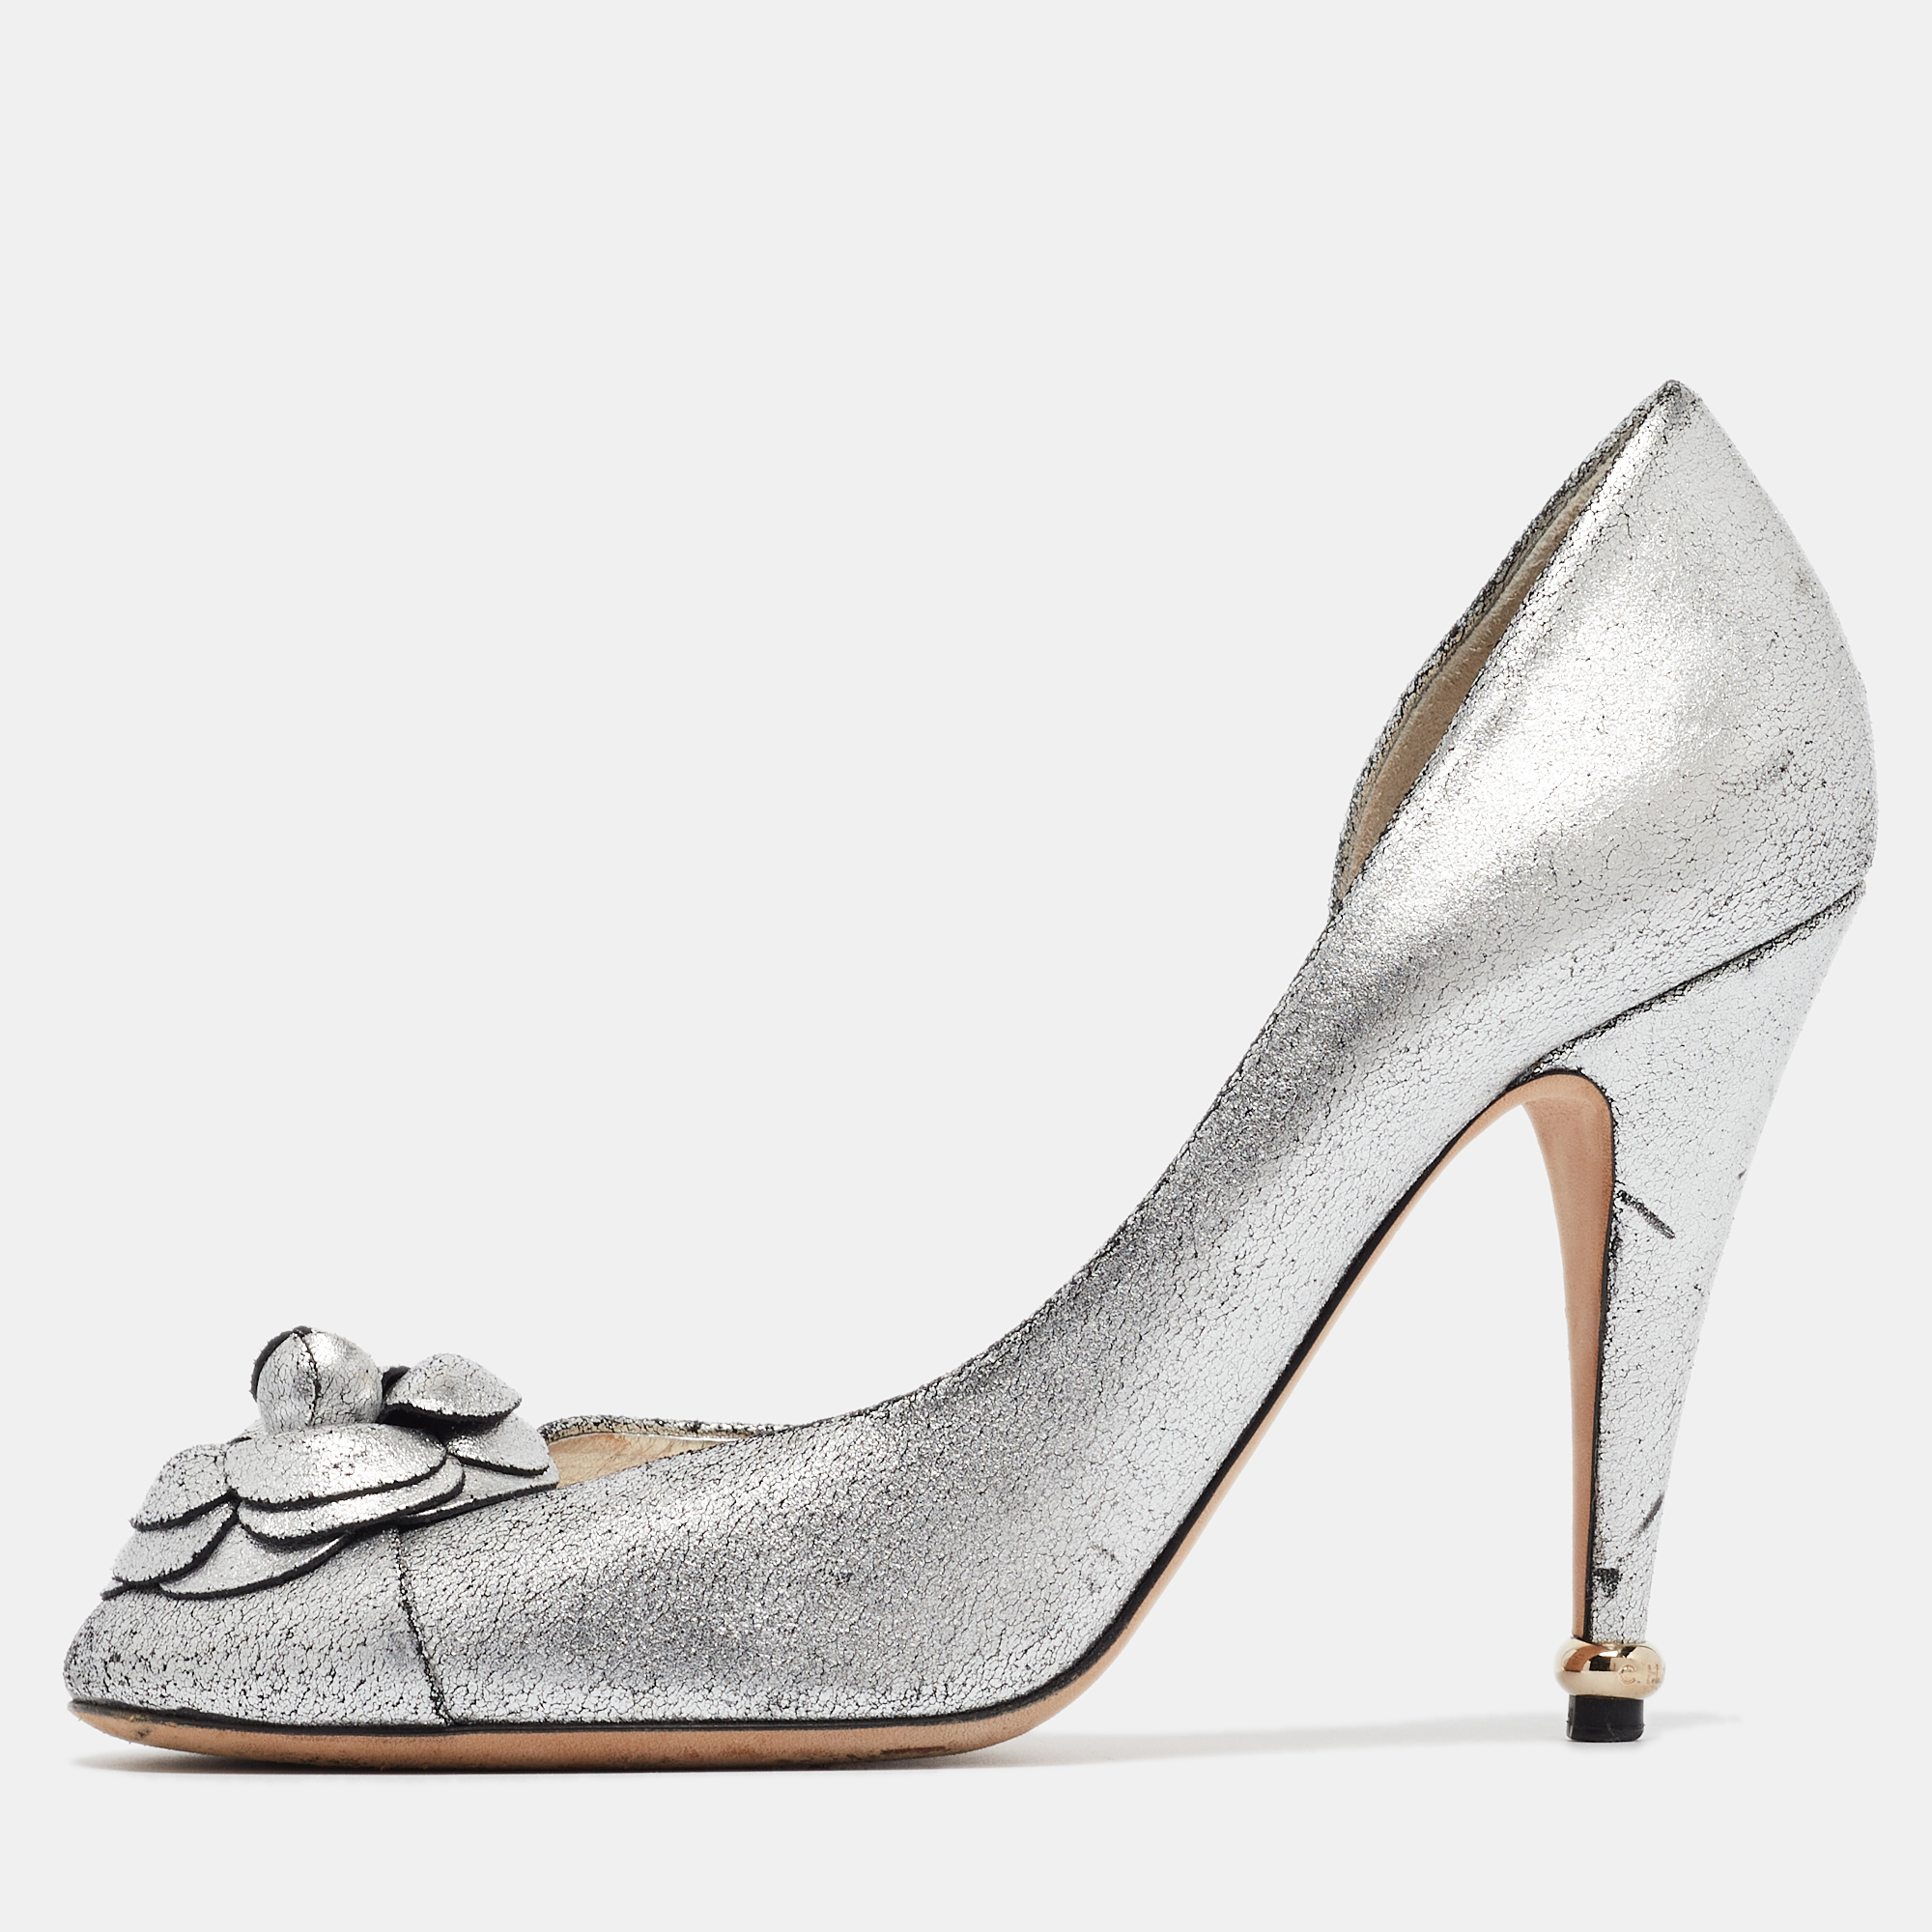 

Chanel Metallic Silver Leather Camellia D'orsay Pumps Size